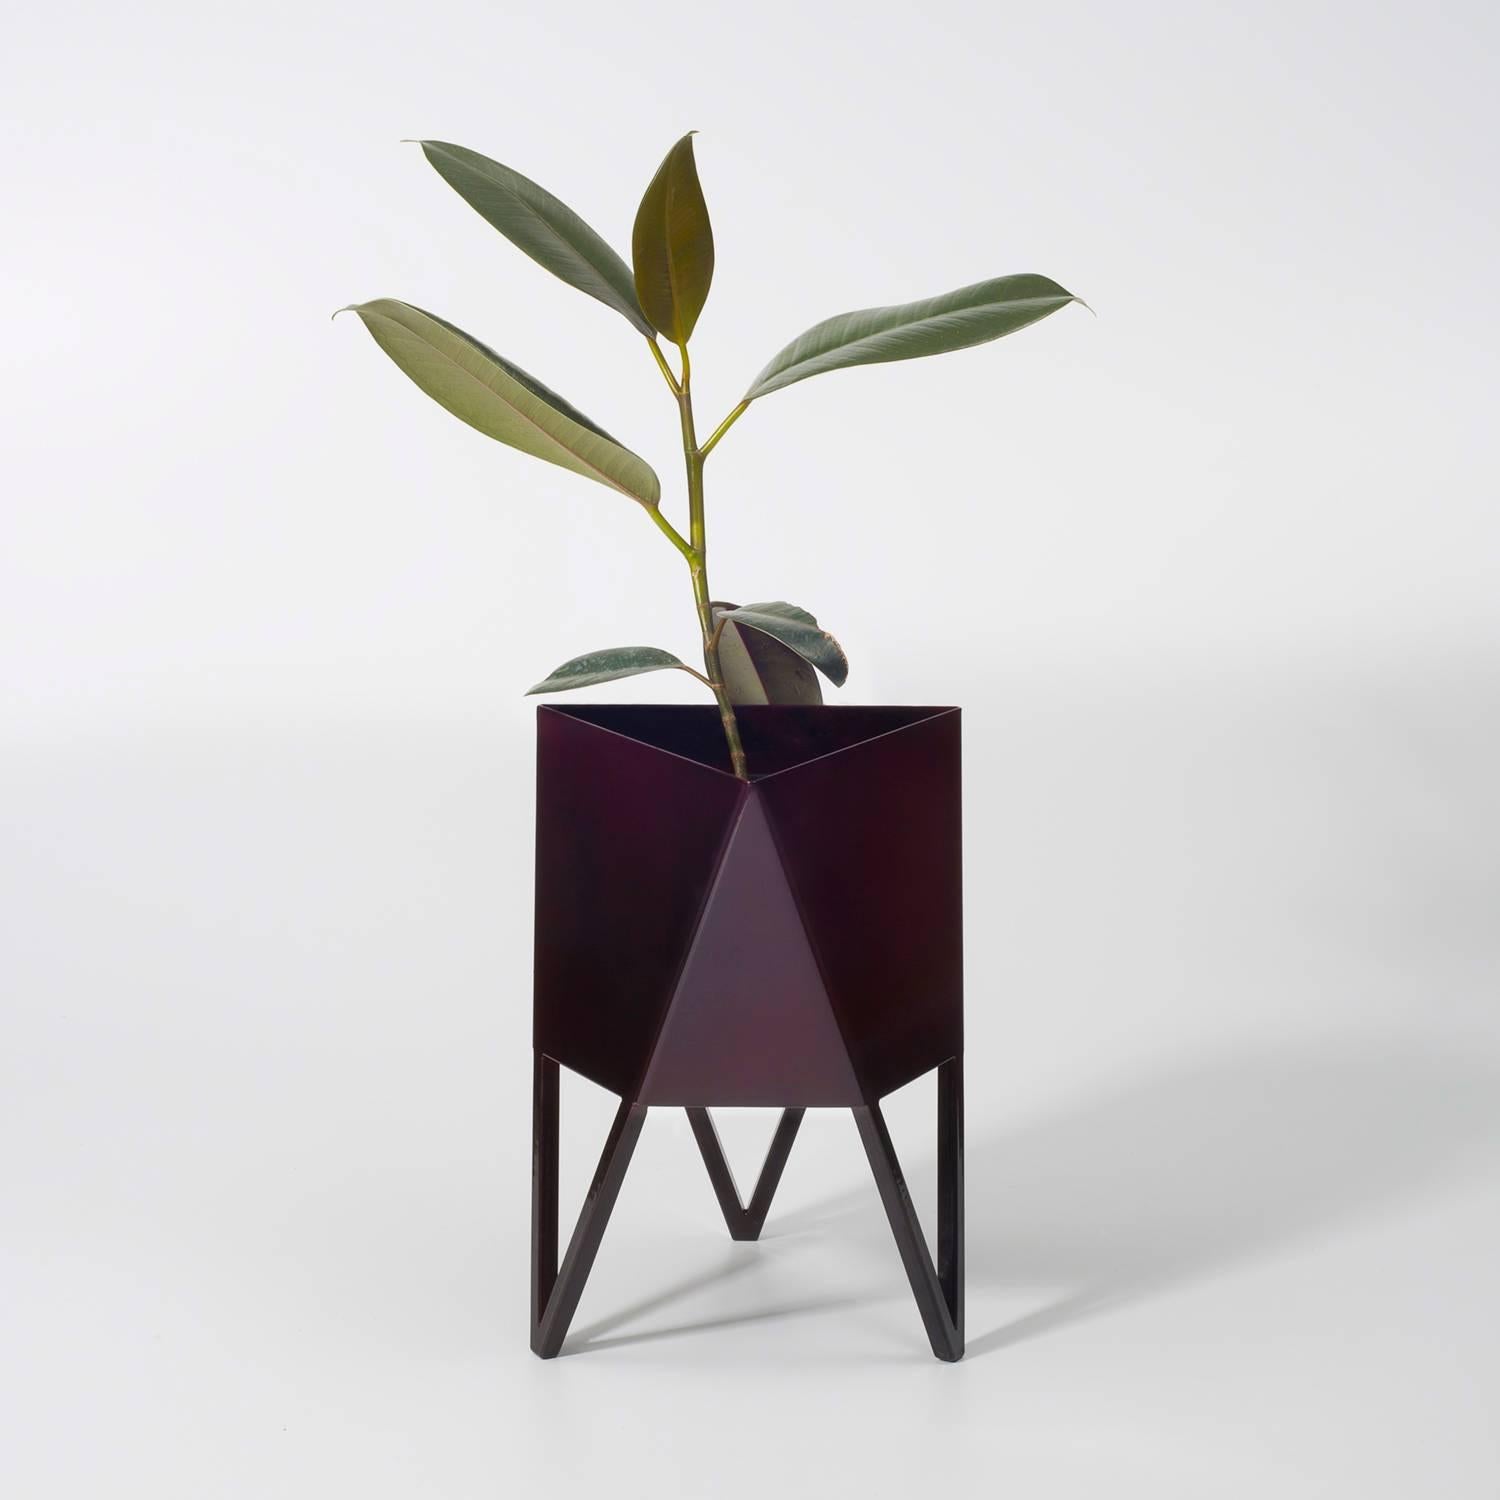 Introducing Force/Collide's signature planter in glossy maroon. Using a seamless brake-forming technique, one sheet of steel is wrapped into a unique geometric pattern that's triangular at the top and hexagonal at the base. Three V-shaped legs